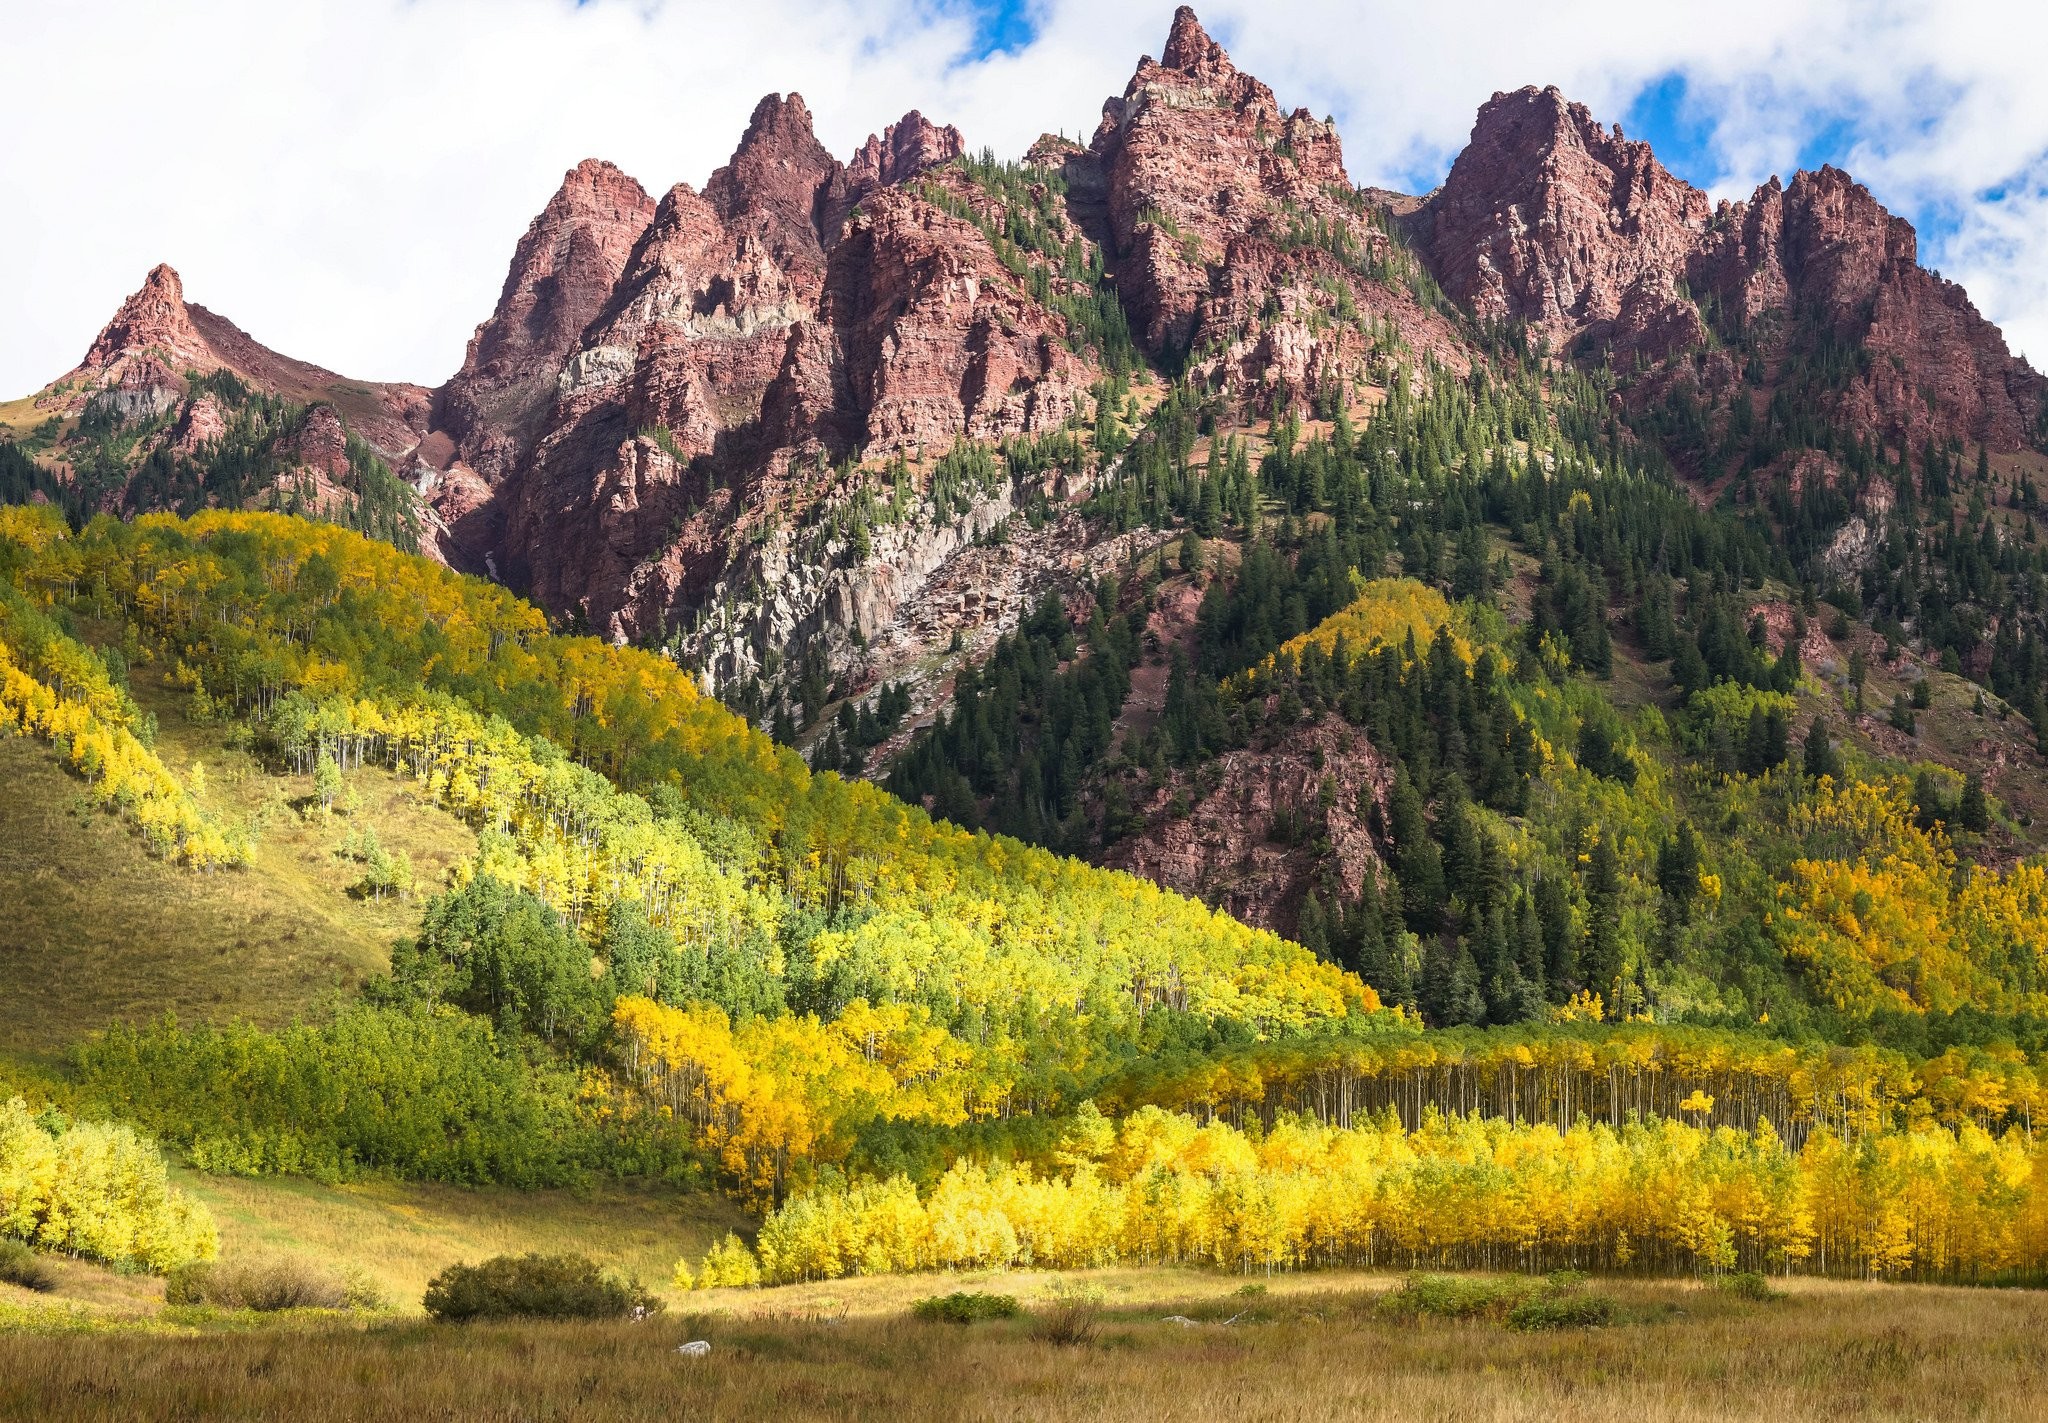 2048x1423 rocky,hd wallpaper windows background images, forest, forest, usa, autumn,  download, colorado,mountain, free, national, park, montane, mountain view,  ...